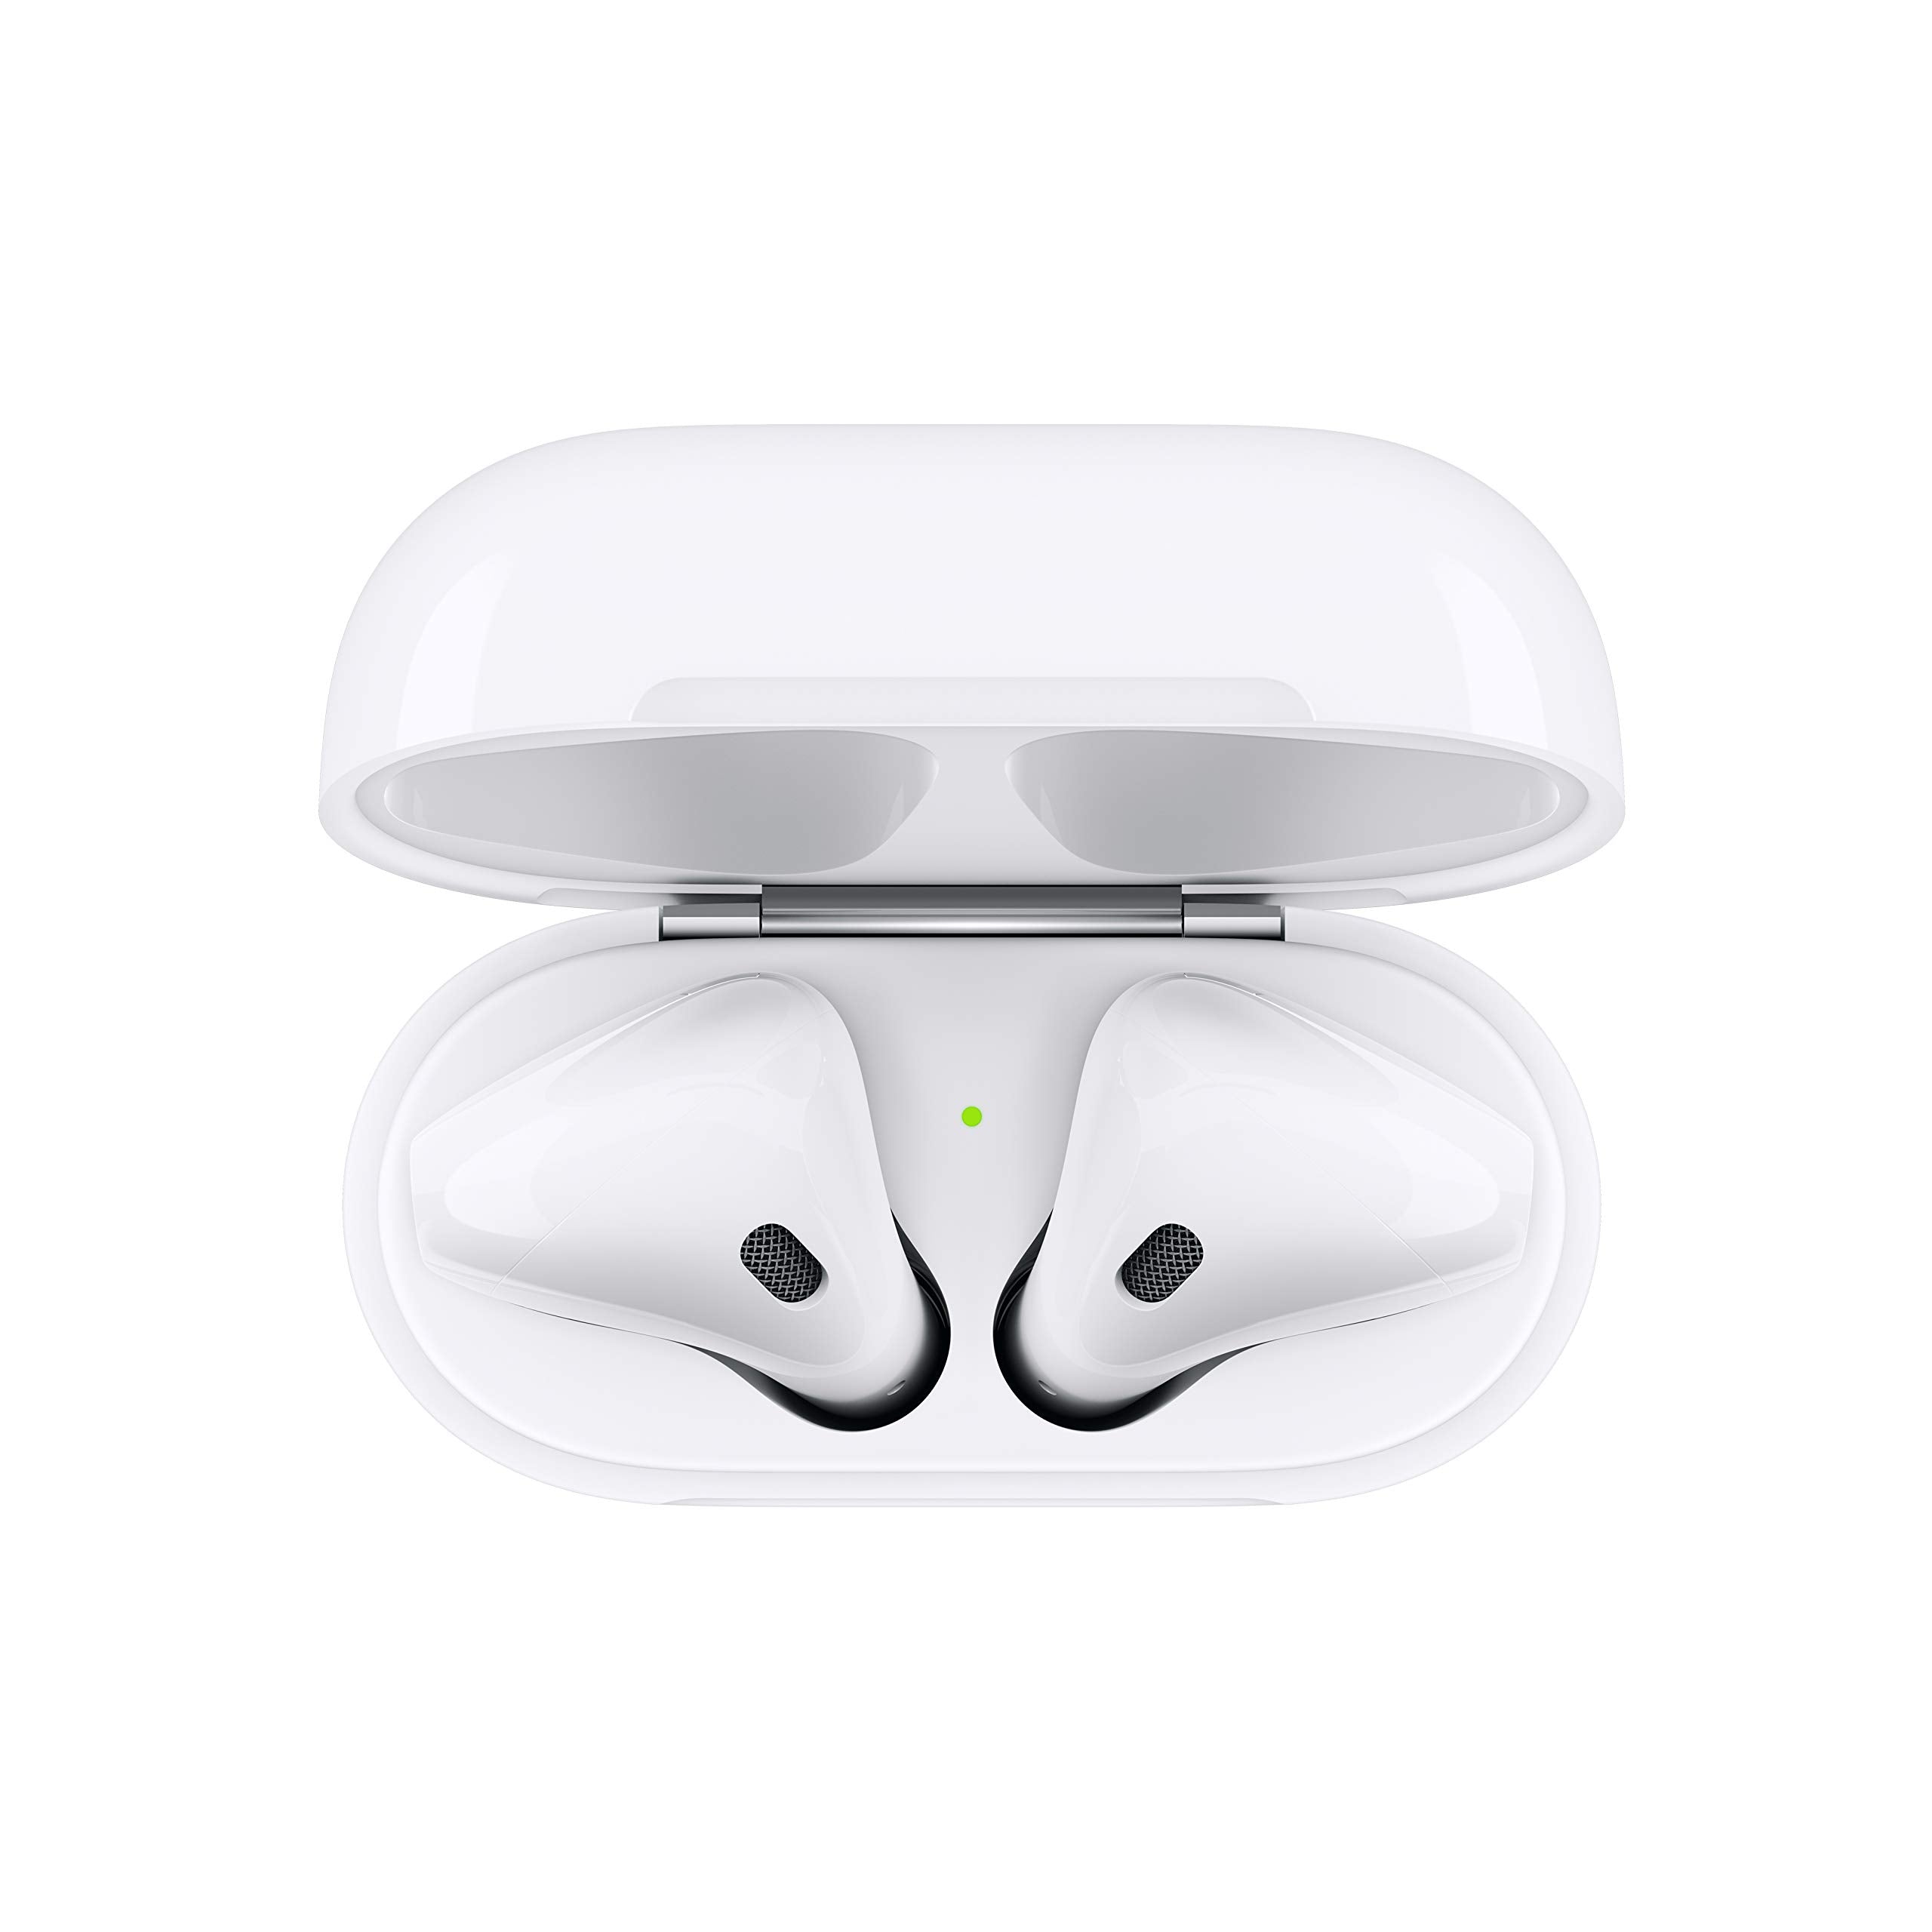 Apple AirPods (2nd Generation) Wireless Ear Buds, Bluetooth Headphones with Lightning Charging Case Included, Over 24 Hours of Battery Life, Effortless Setup for iPhone - Caps Fitted